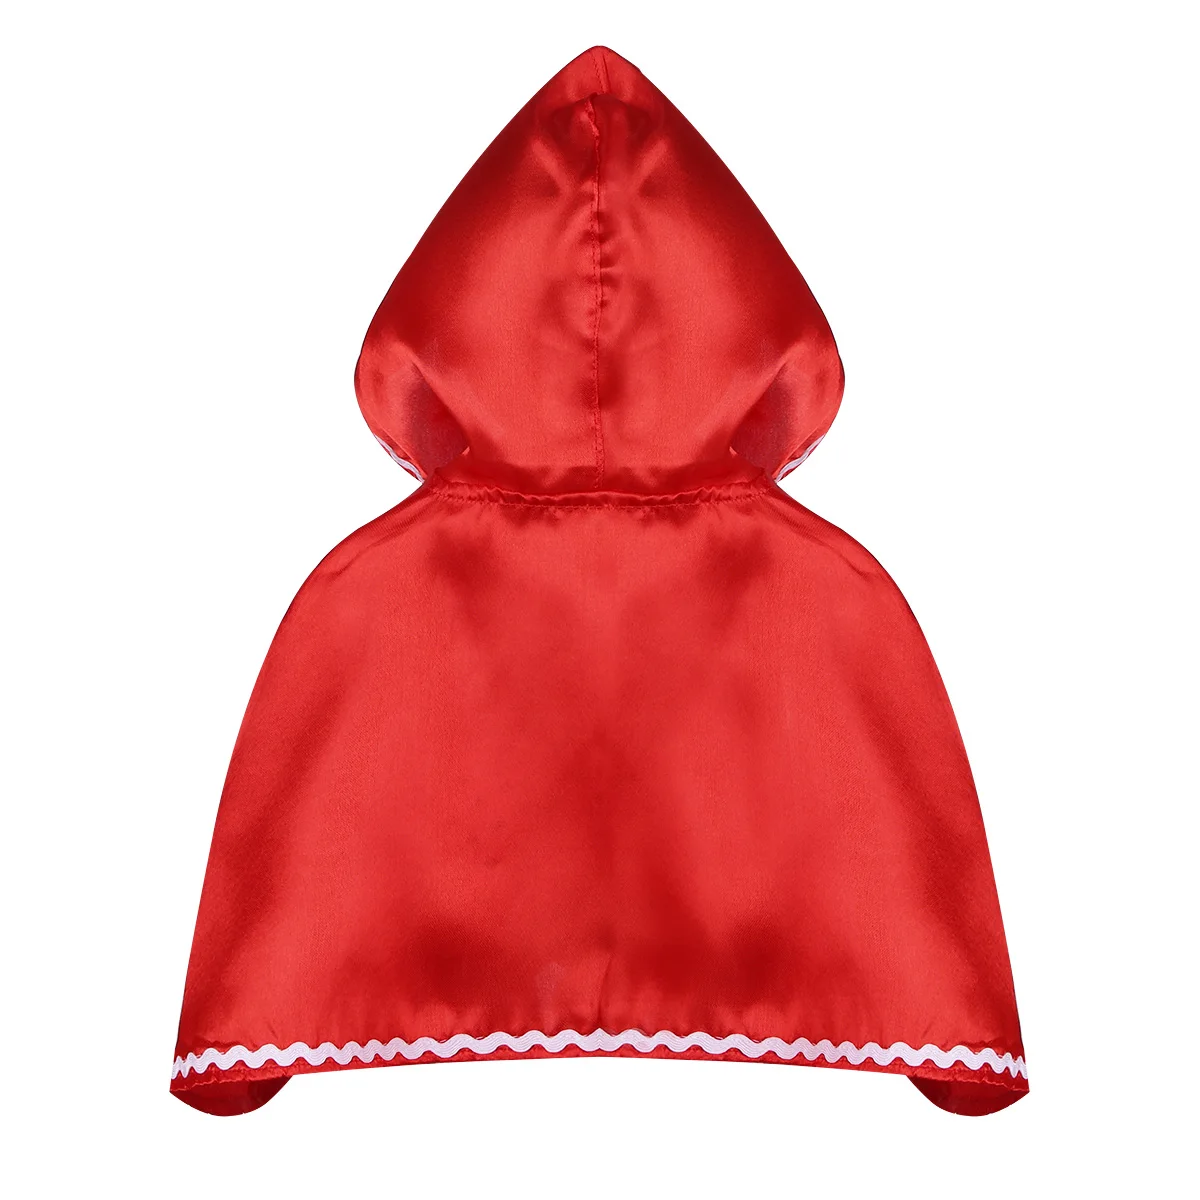 Red Kids Girls Riding Hooded Cloak Cape for Halloween Little Princess Cosplay Costume Holiday Carnival Party Dress Up Cape